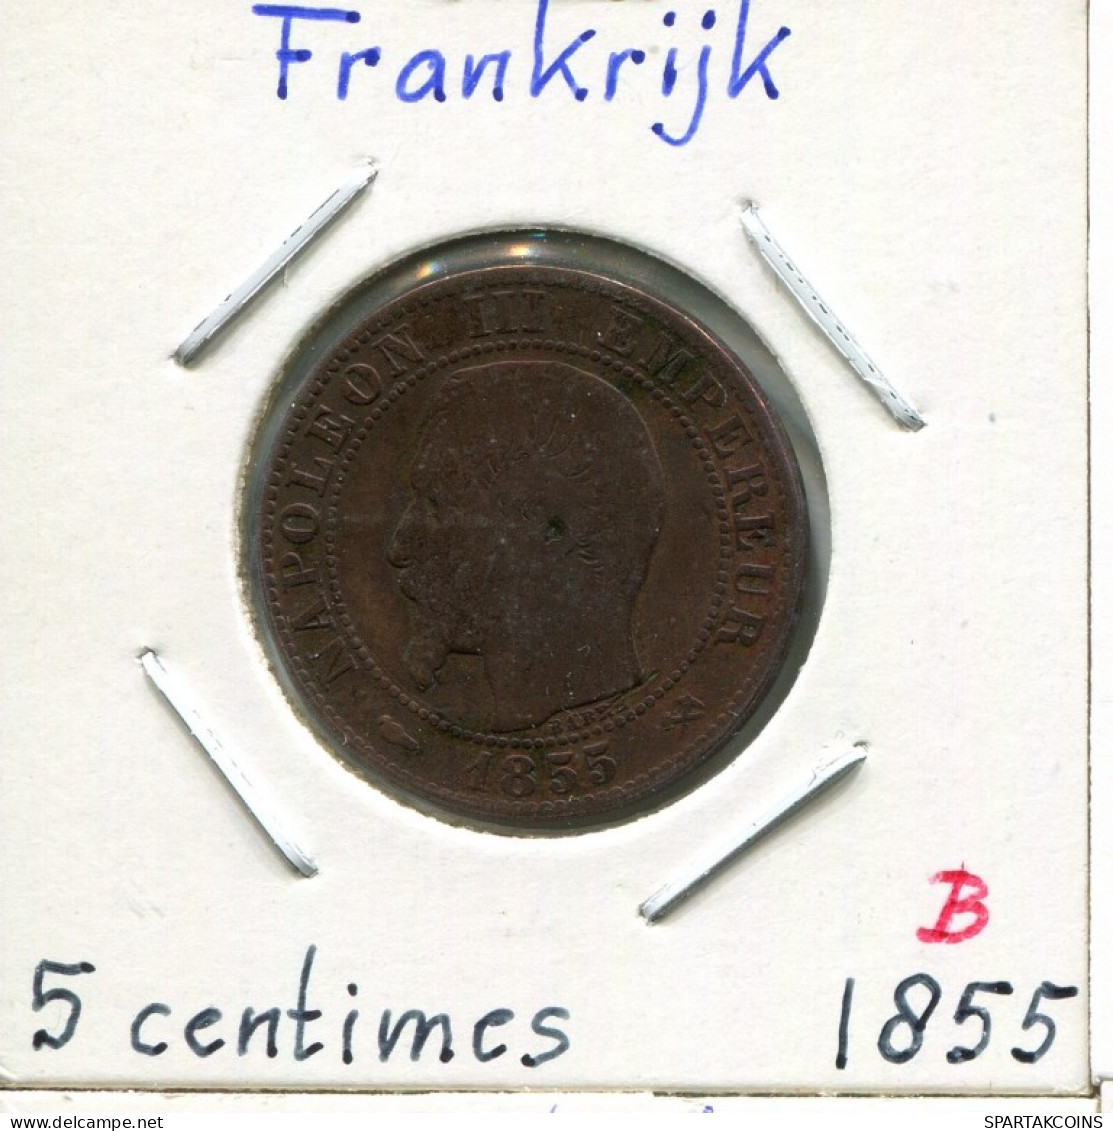 2 CENTIMES 1855 B FRANCE Pièce Napoleon III Imperator #AK991.F.A - 2 Centimes